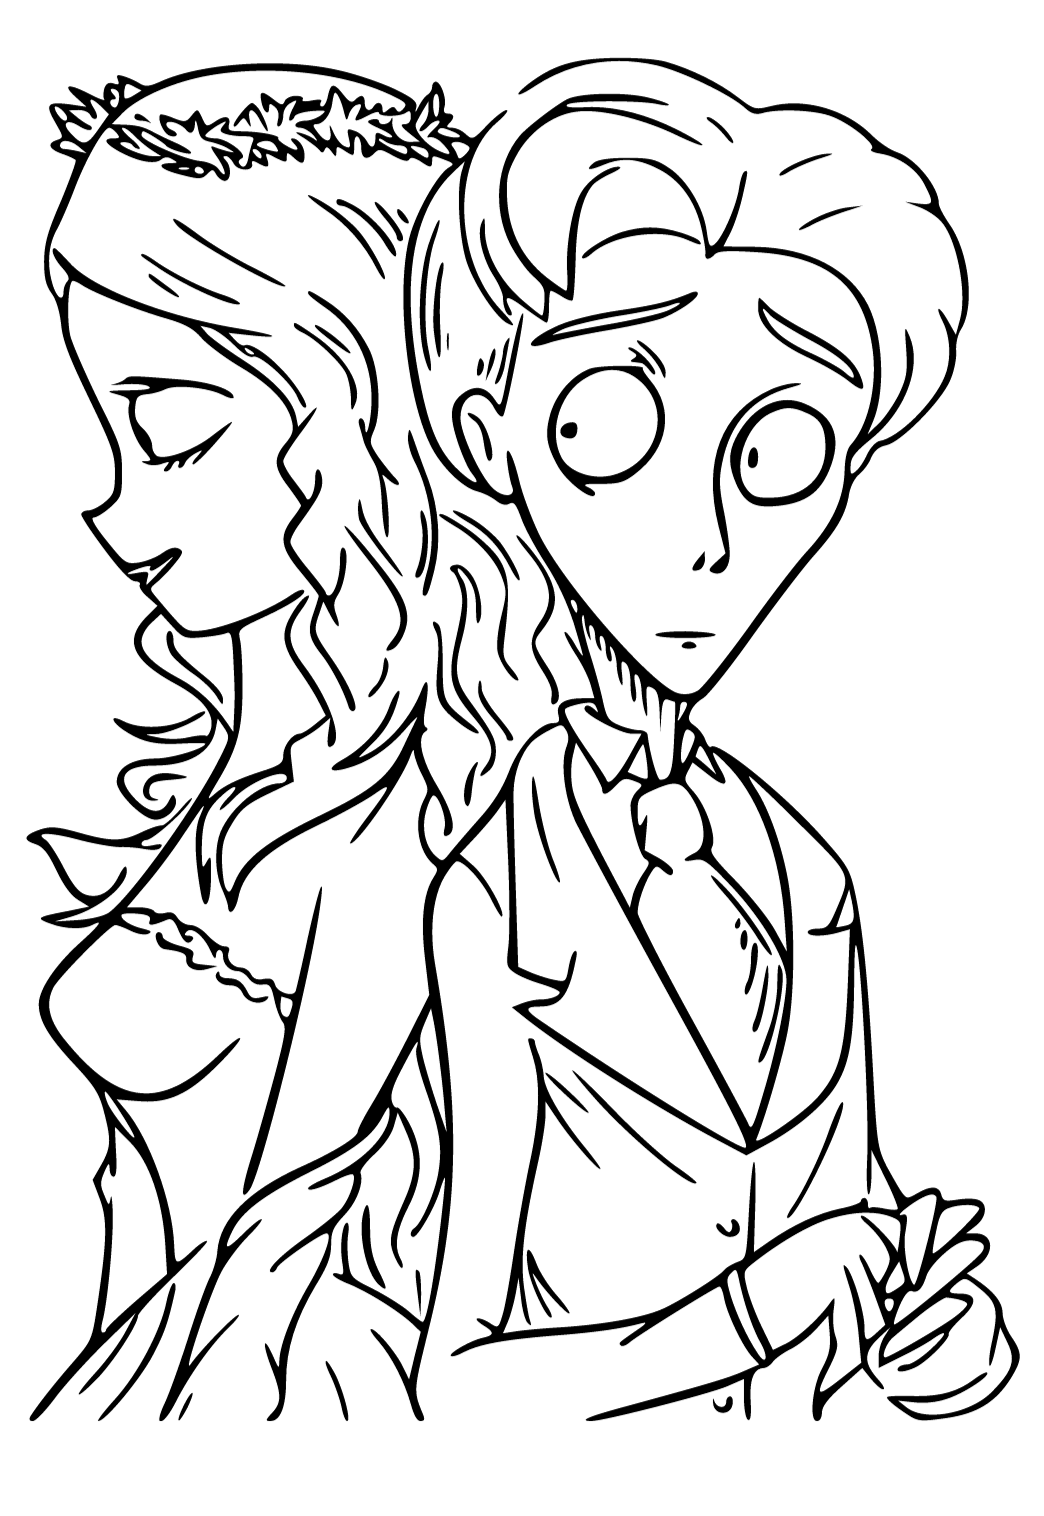 Free Printable Corpse Bride Pair Coloring Page for Adults and Kids ...